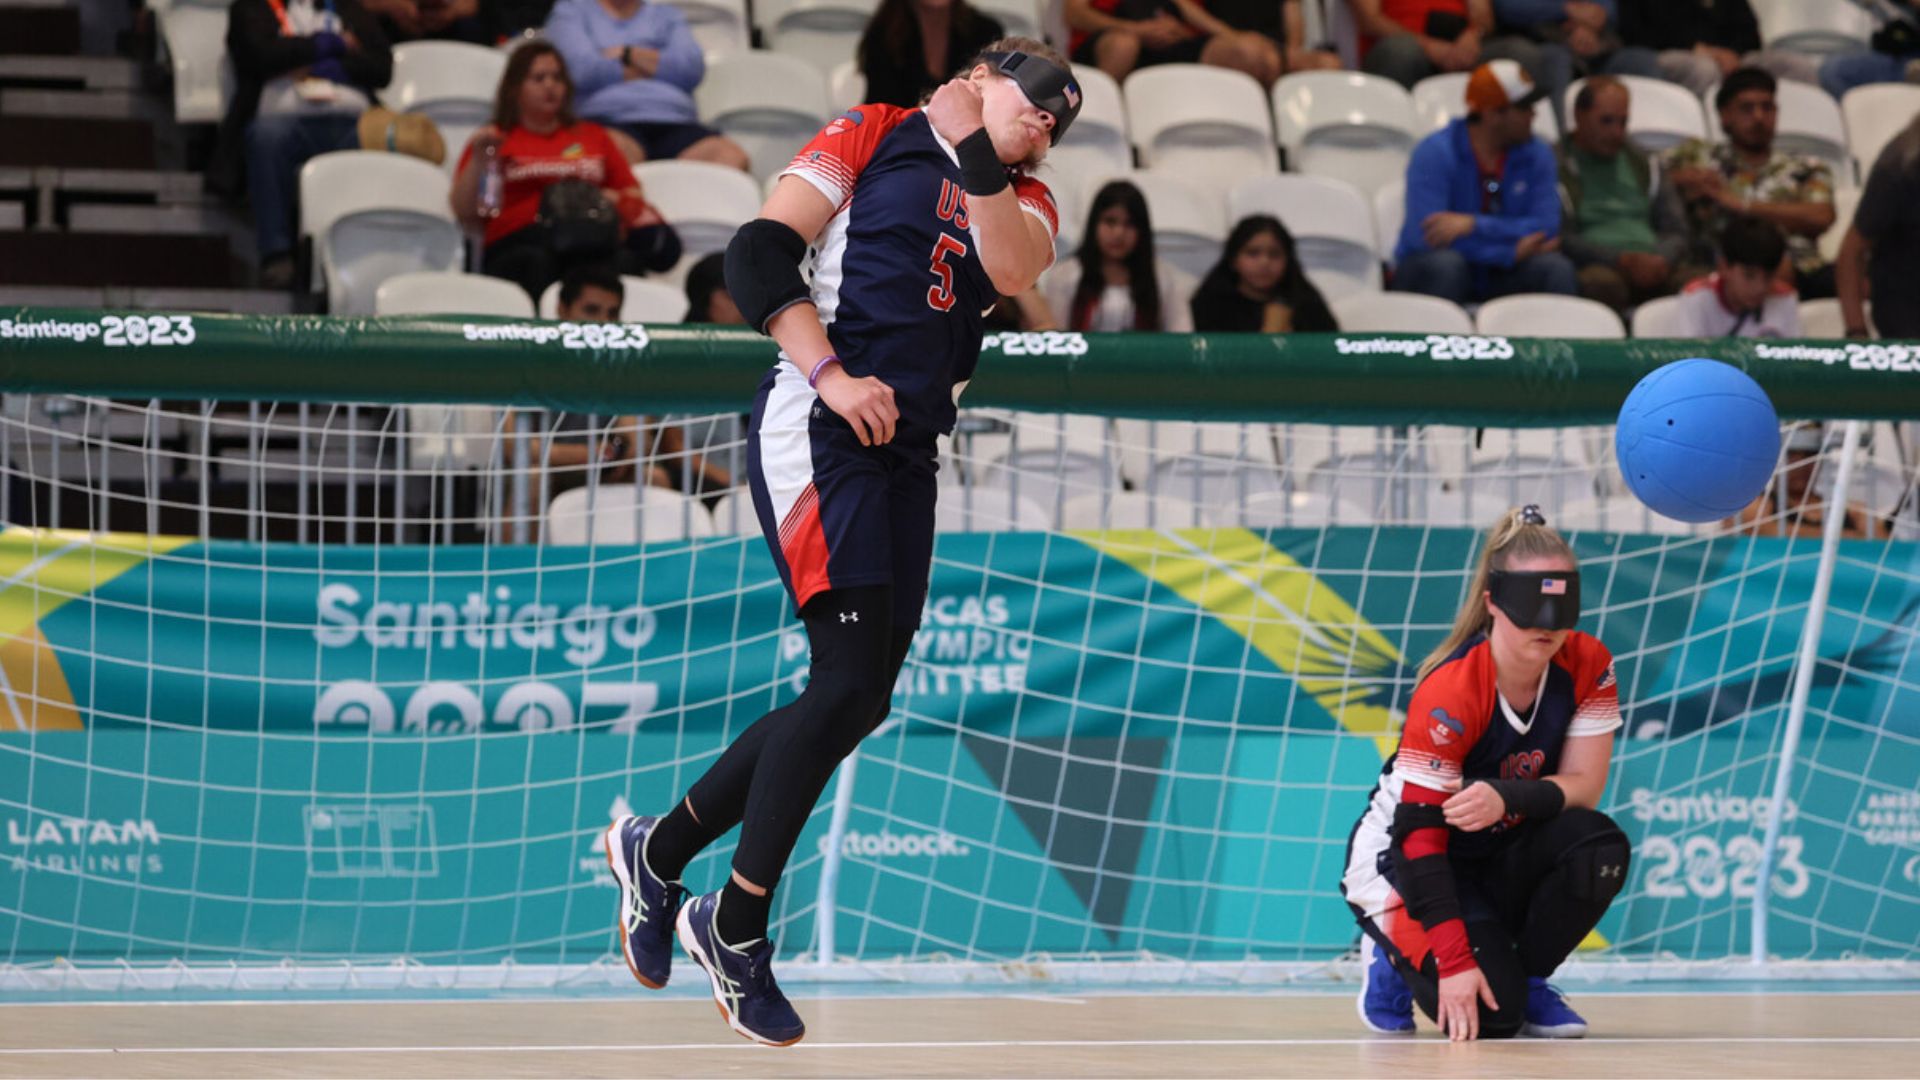 United States Remains Undefeated in Female's Goalball beating Peru